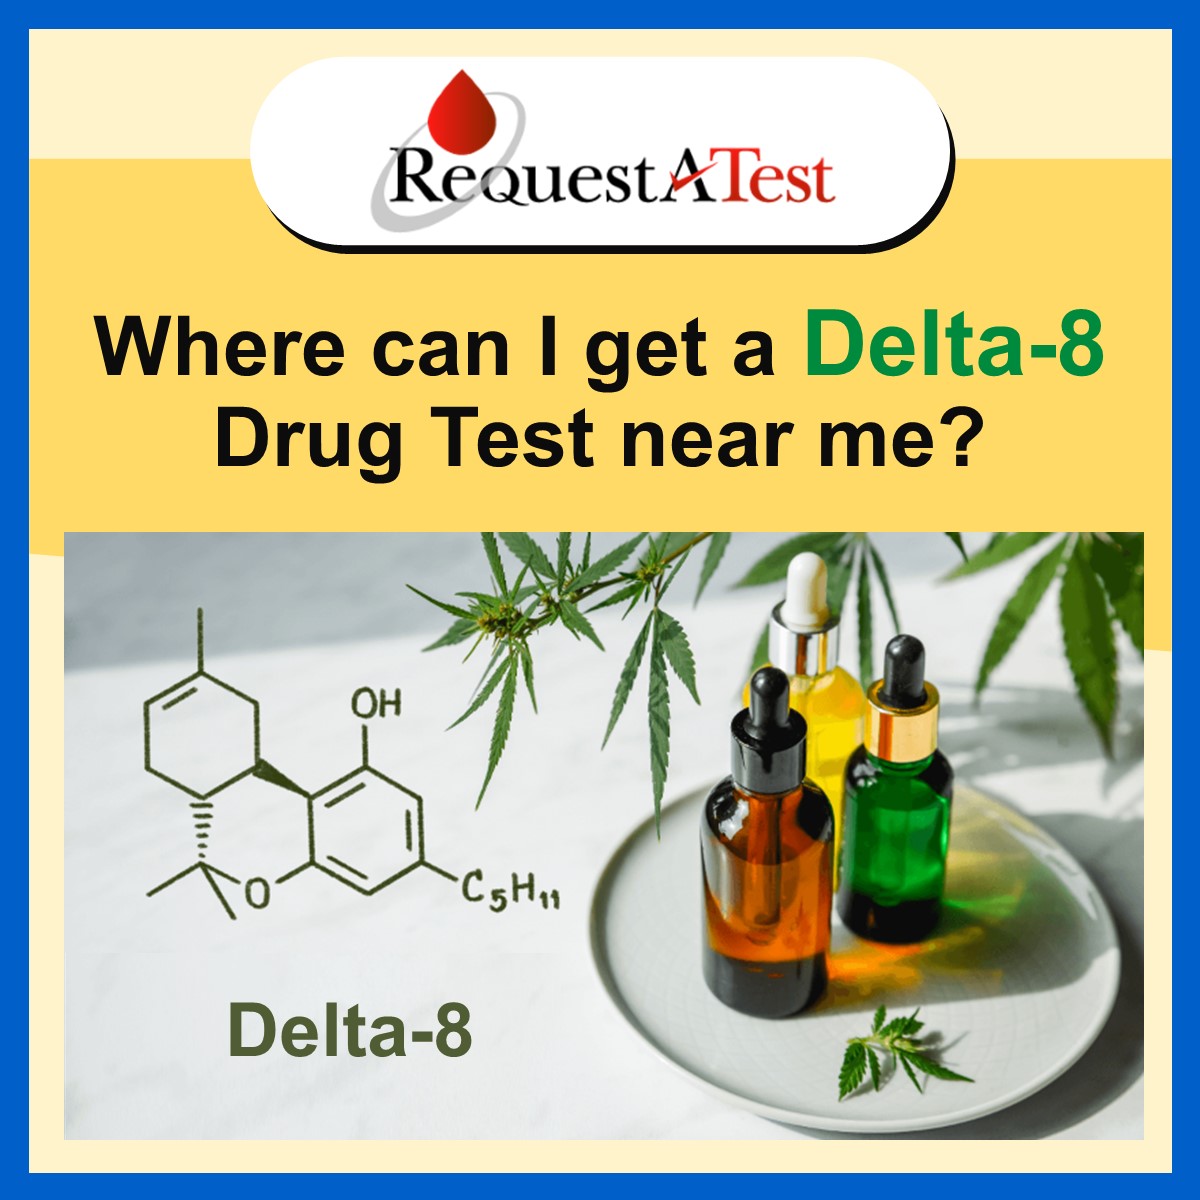 Request A Test offers a convenient affordable option for anyone who needs testing for Delta 8 or other drugs.

This test is one of the only available ways to screen for Delta 8 specifically.

Call 1-888-732-2348 or visit requestatest.com/delta-8-delta-…

#delta8 #delta9 #delta8thc